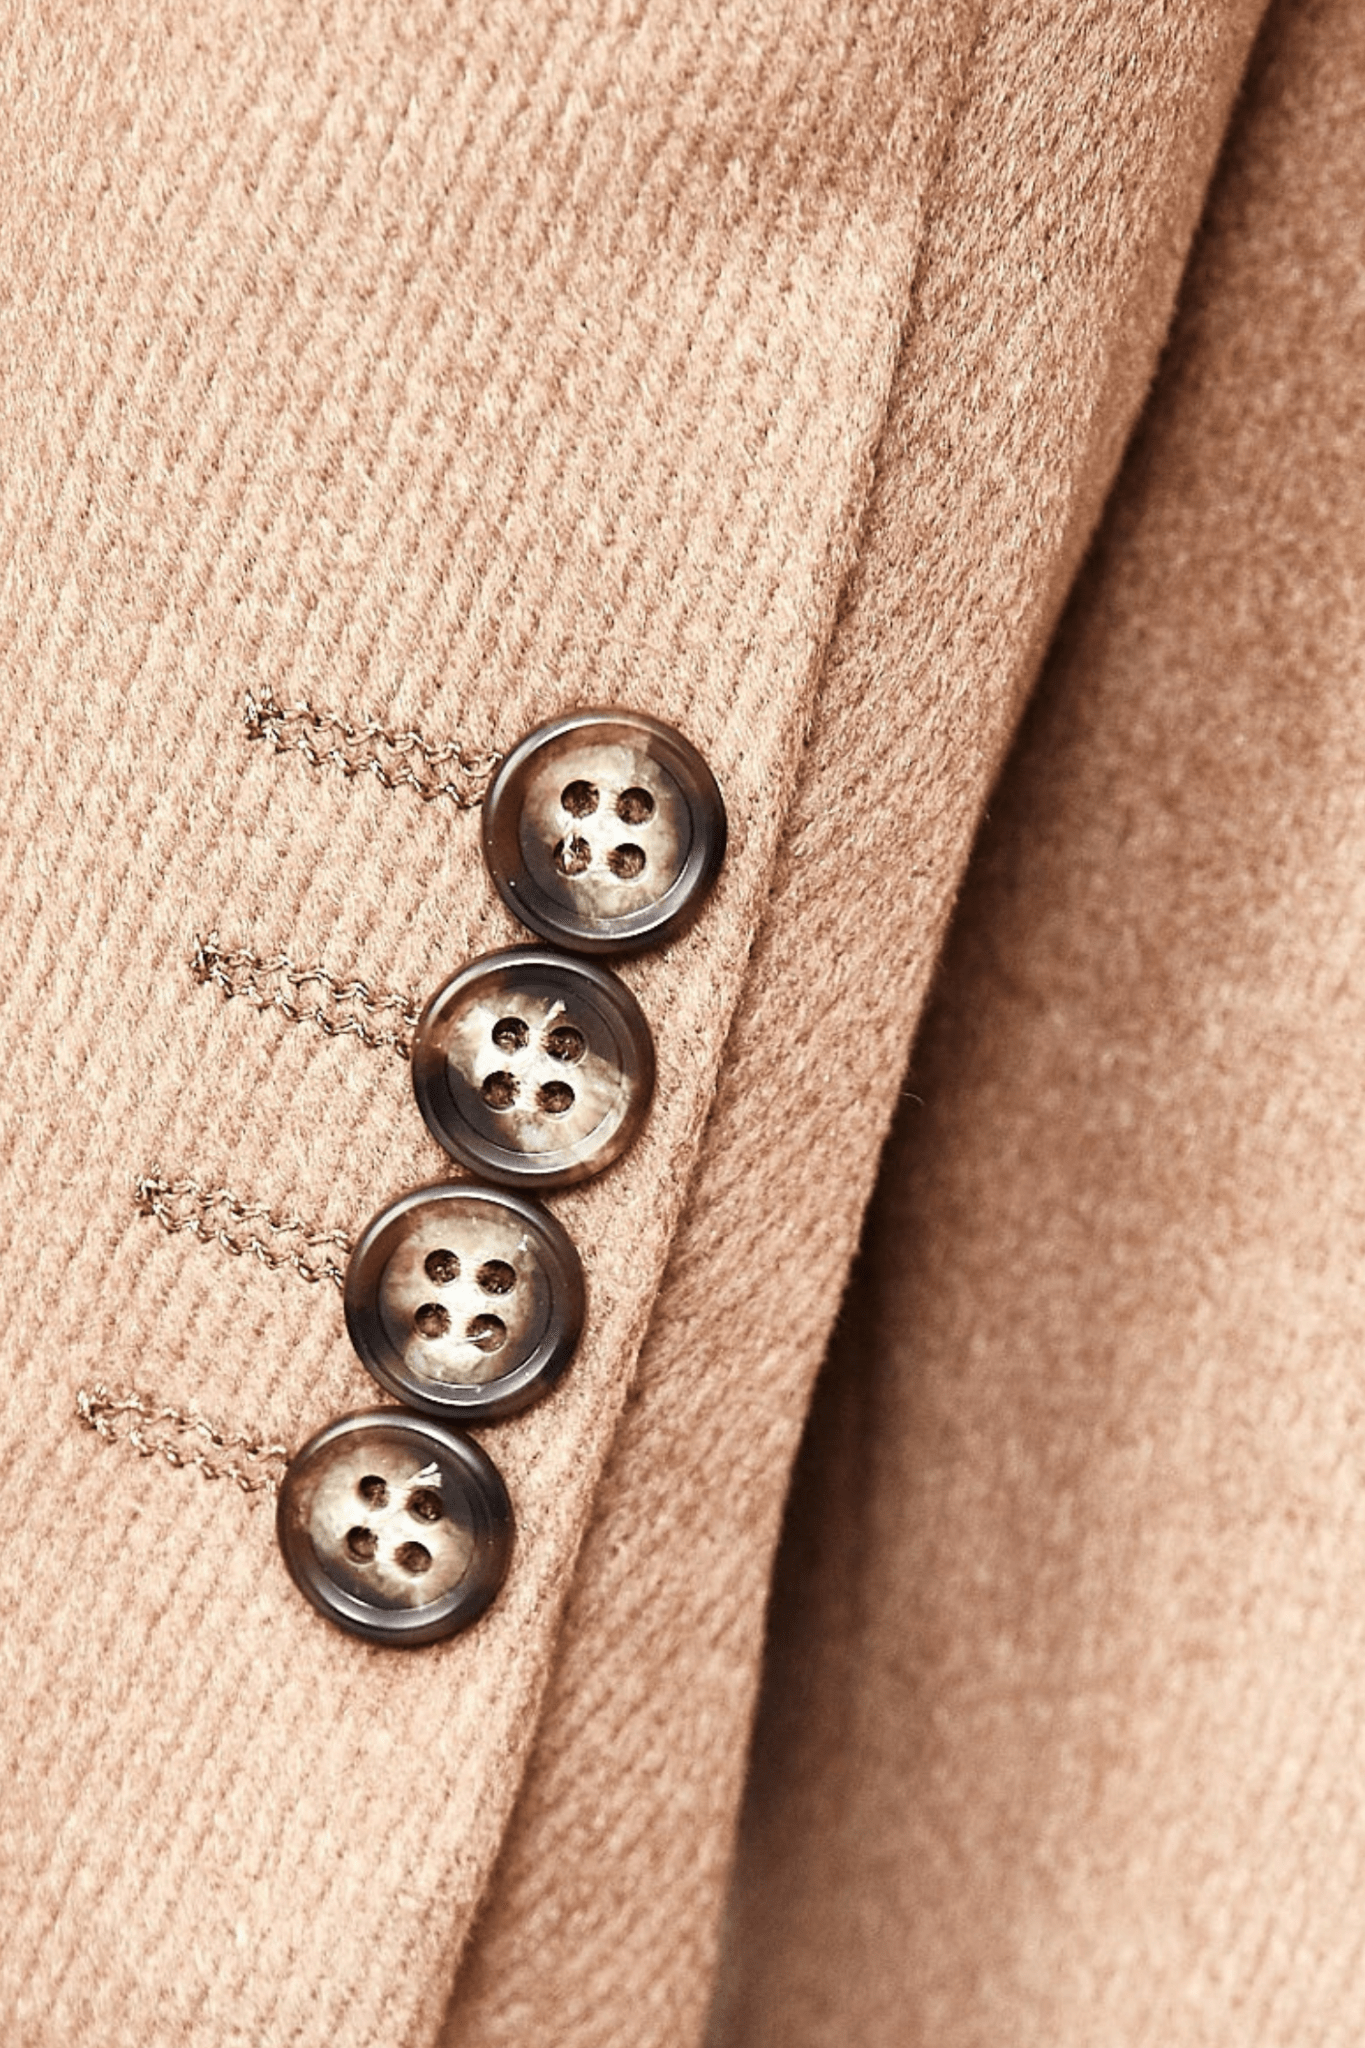 Luxury Overcoat Wool and Cashmere - Camel - My Men's Shop